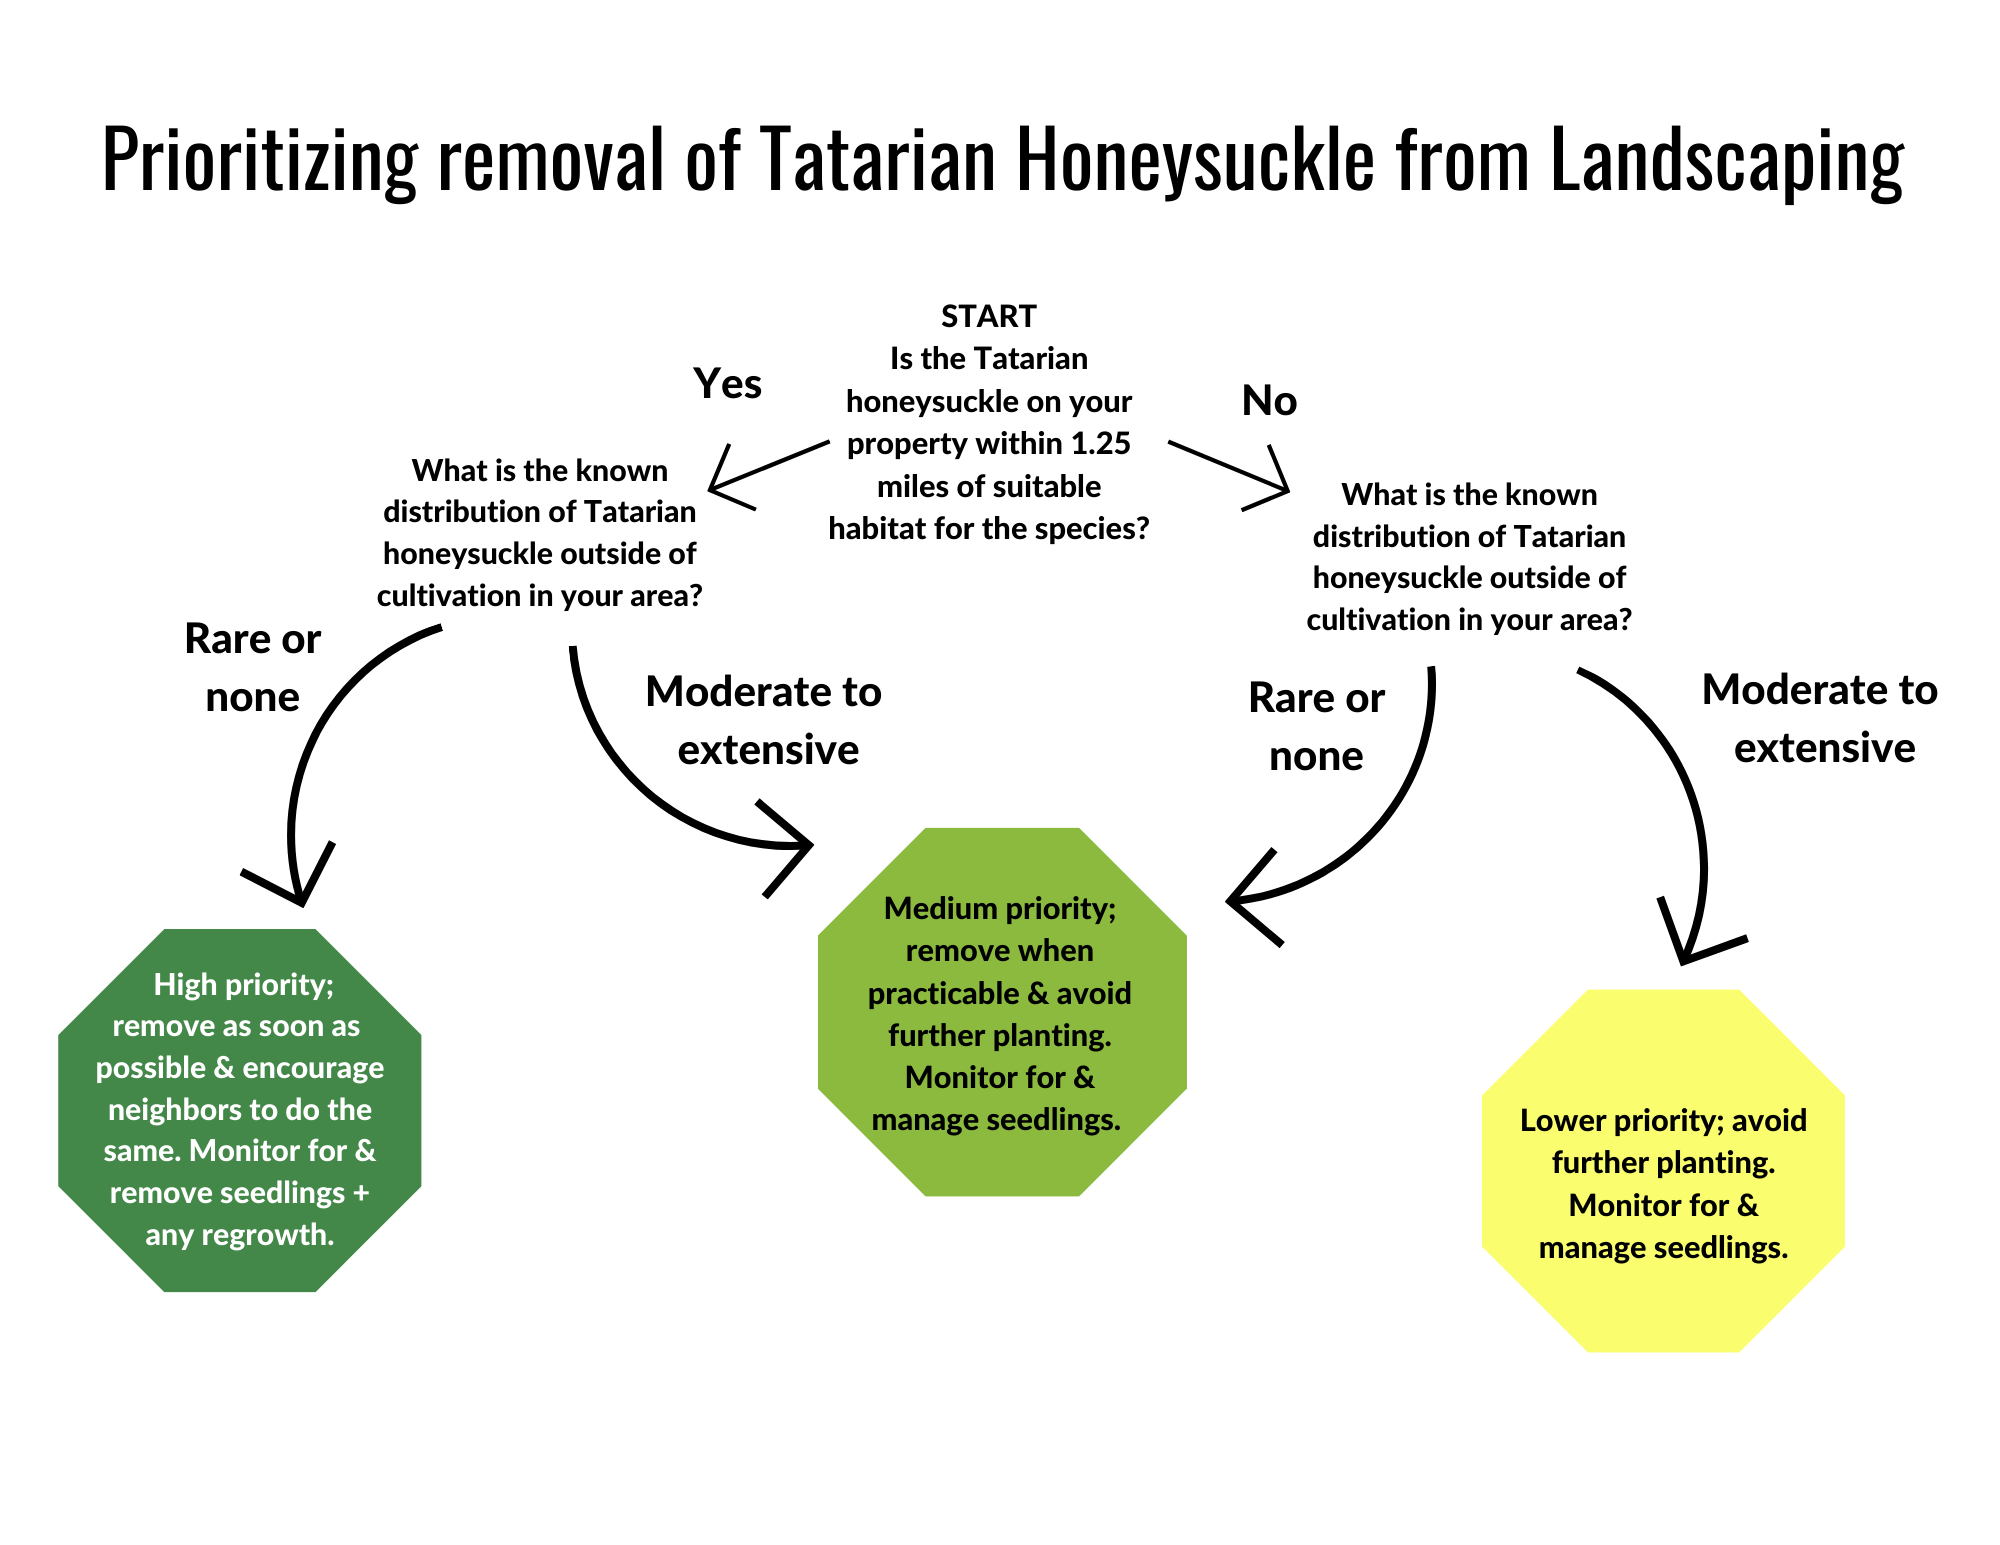 removal decision tree for Tatarian honeysuckle